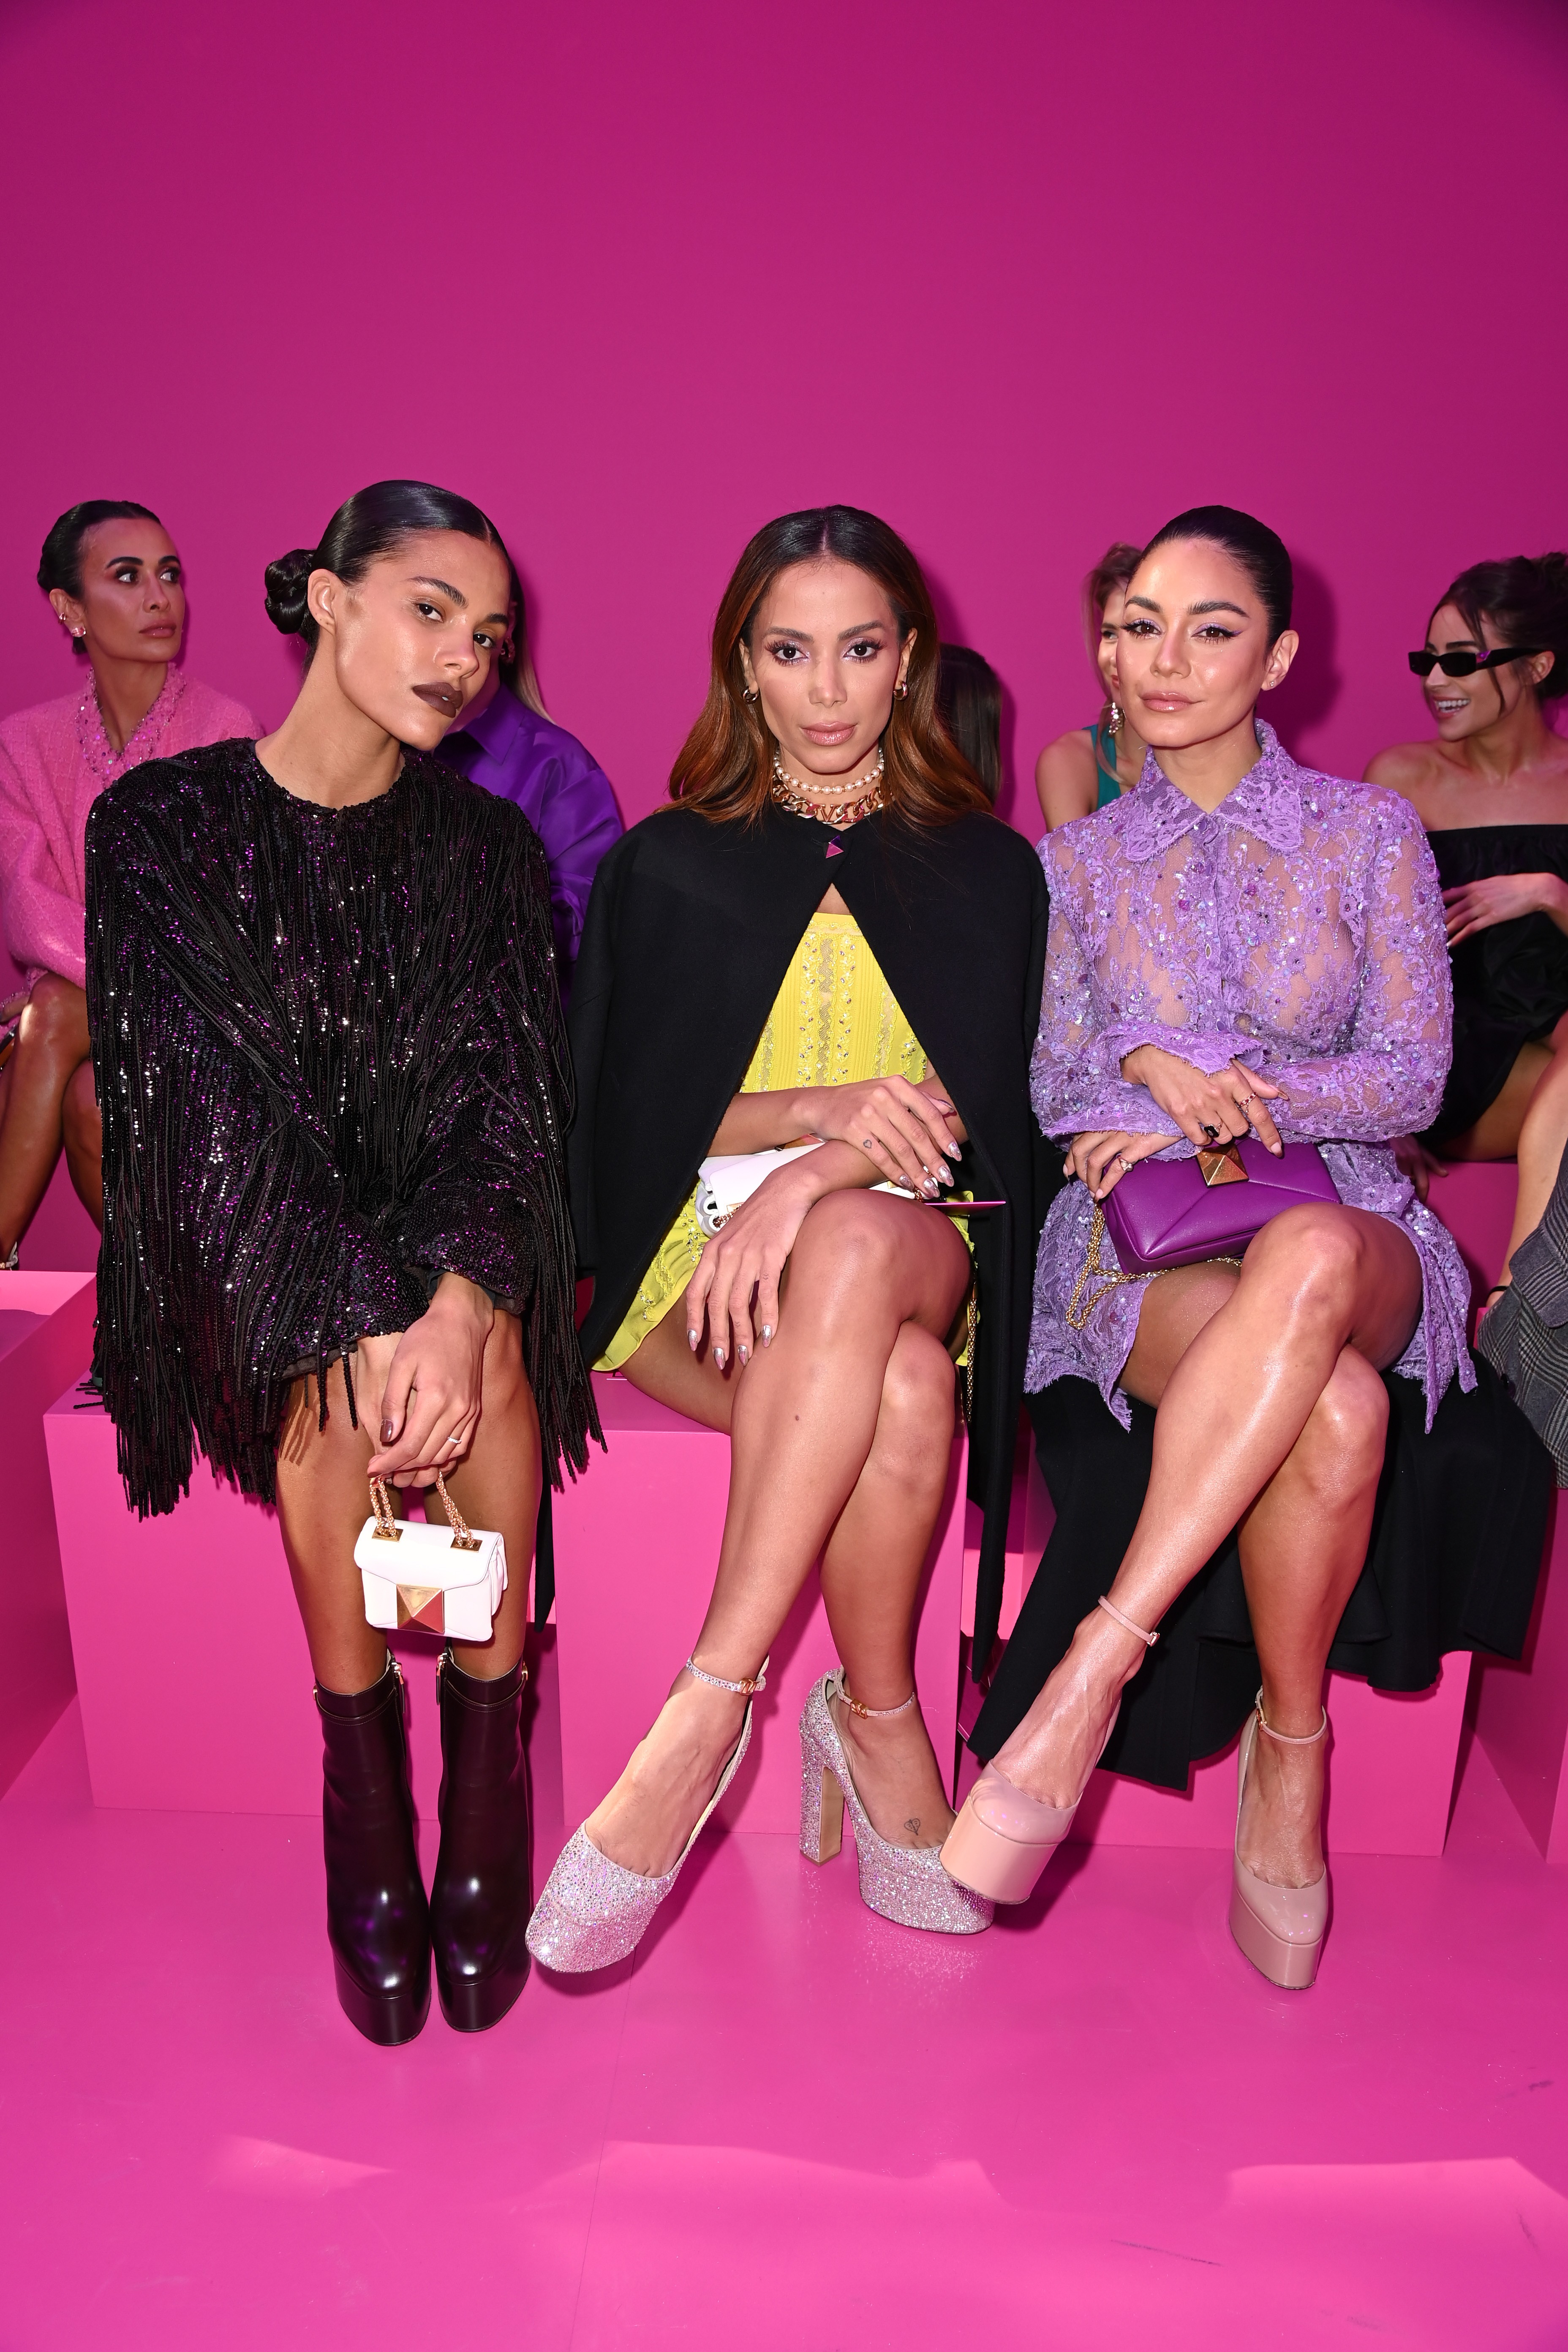 PARIS, FRANCE - MARCH 06: (EDITORIAL USE ONLY - For Non-Editorial use please seek approval from Fashion House) Tina Kunakey, Anitta and Vanessa Hudgens attend the Valentino Womenswear Fall/Winter 2022/2023 show as part of Paris Fashion Week on March 06, 2 (Foto: Getty Images)